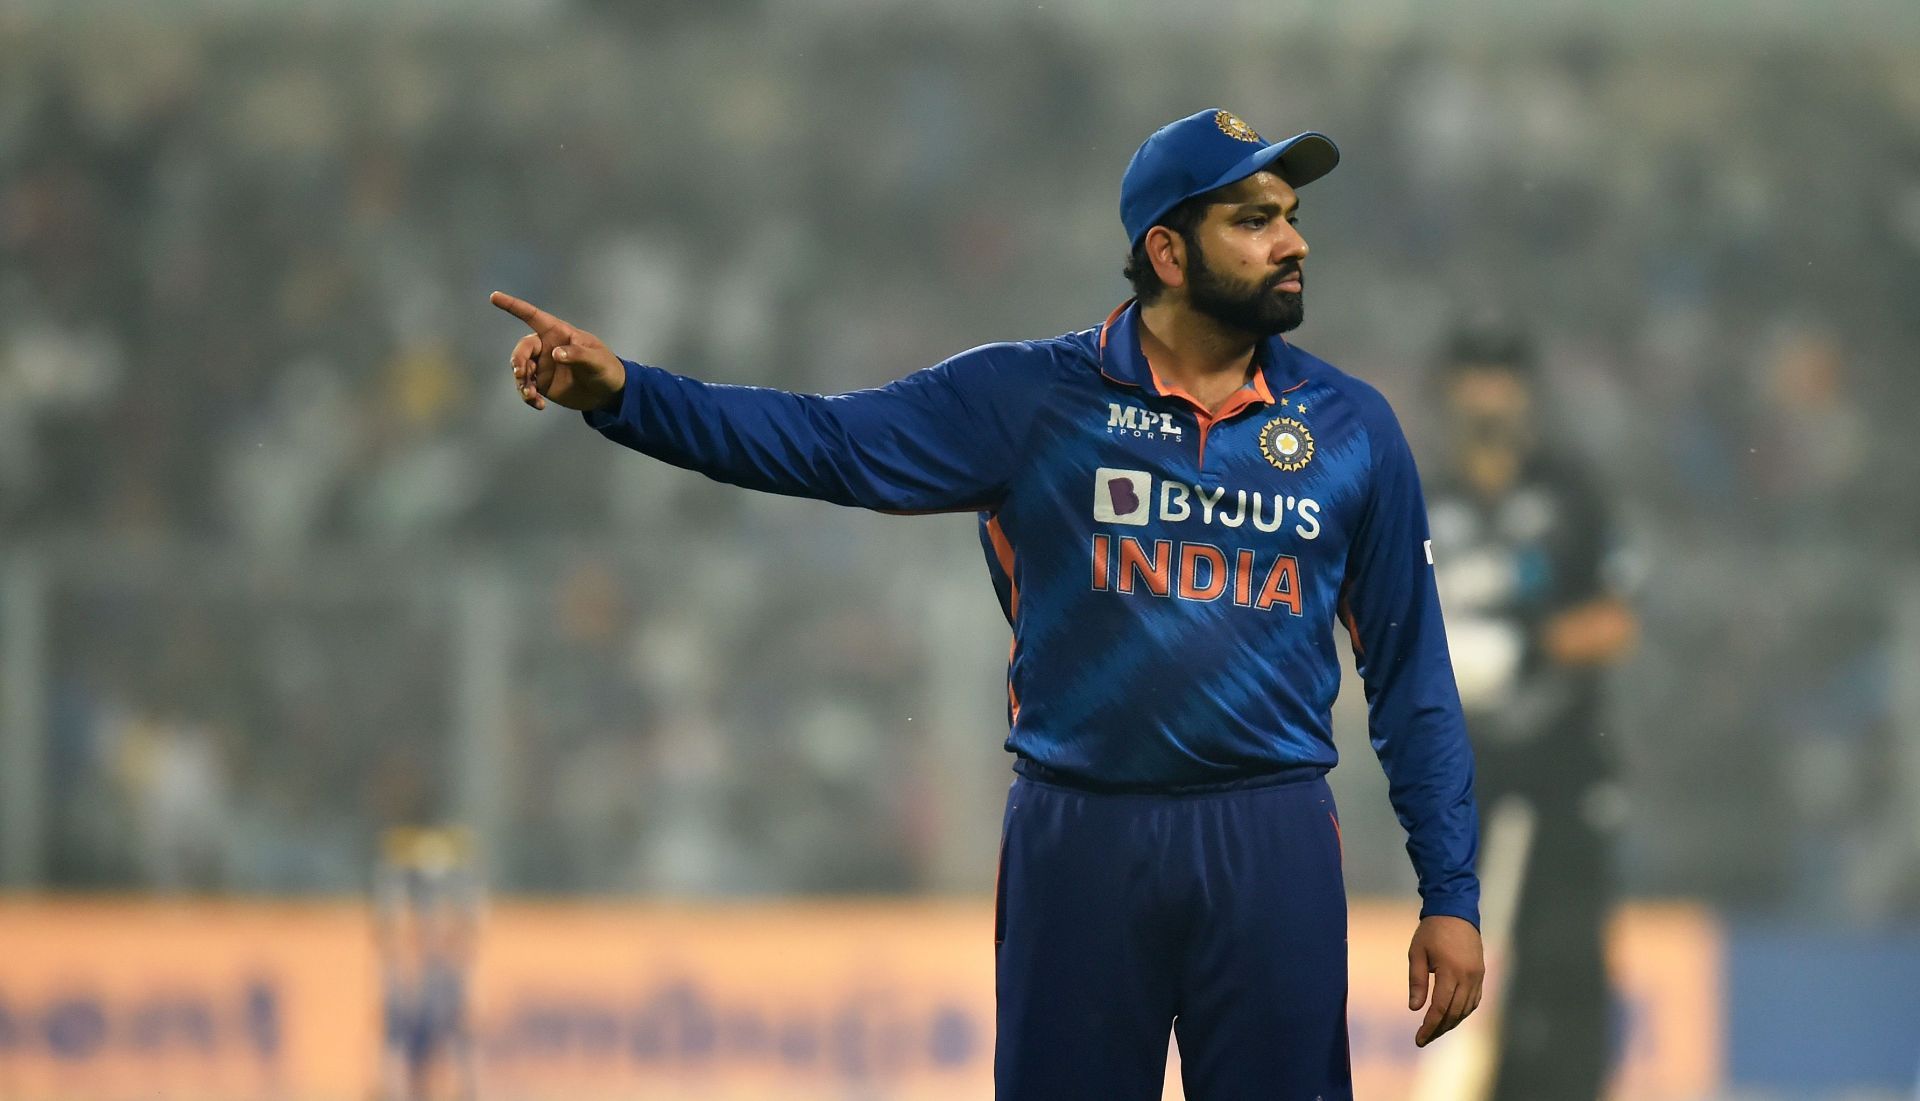 Rohit Sharma will lead Team India in the ODI series against West Indies